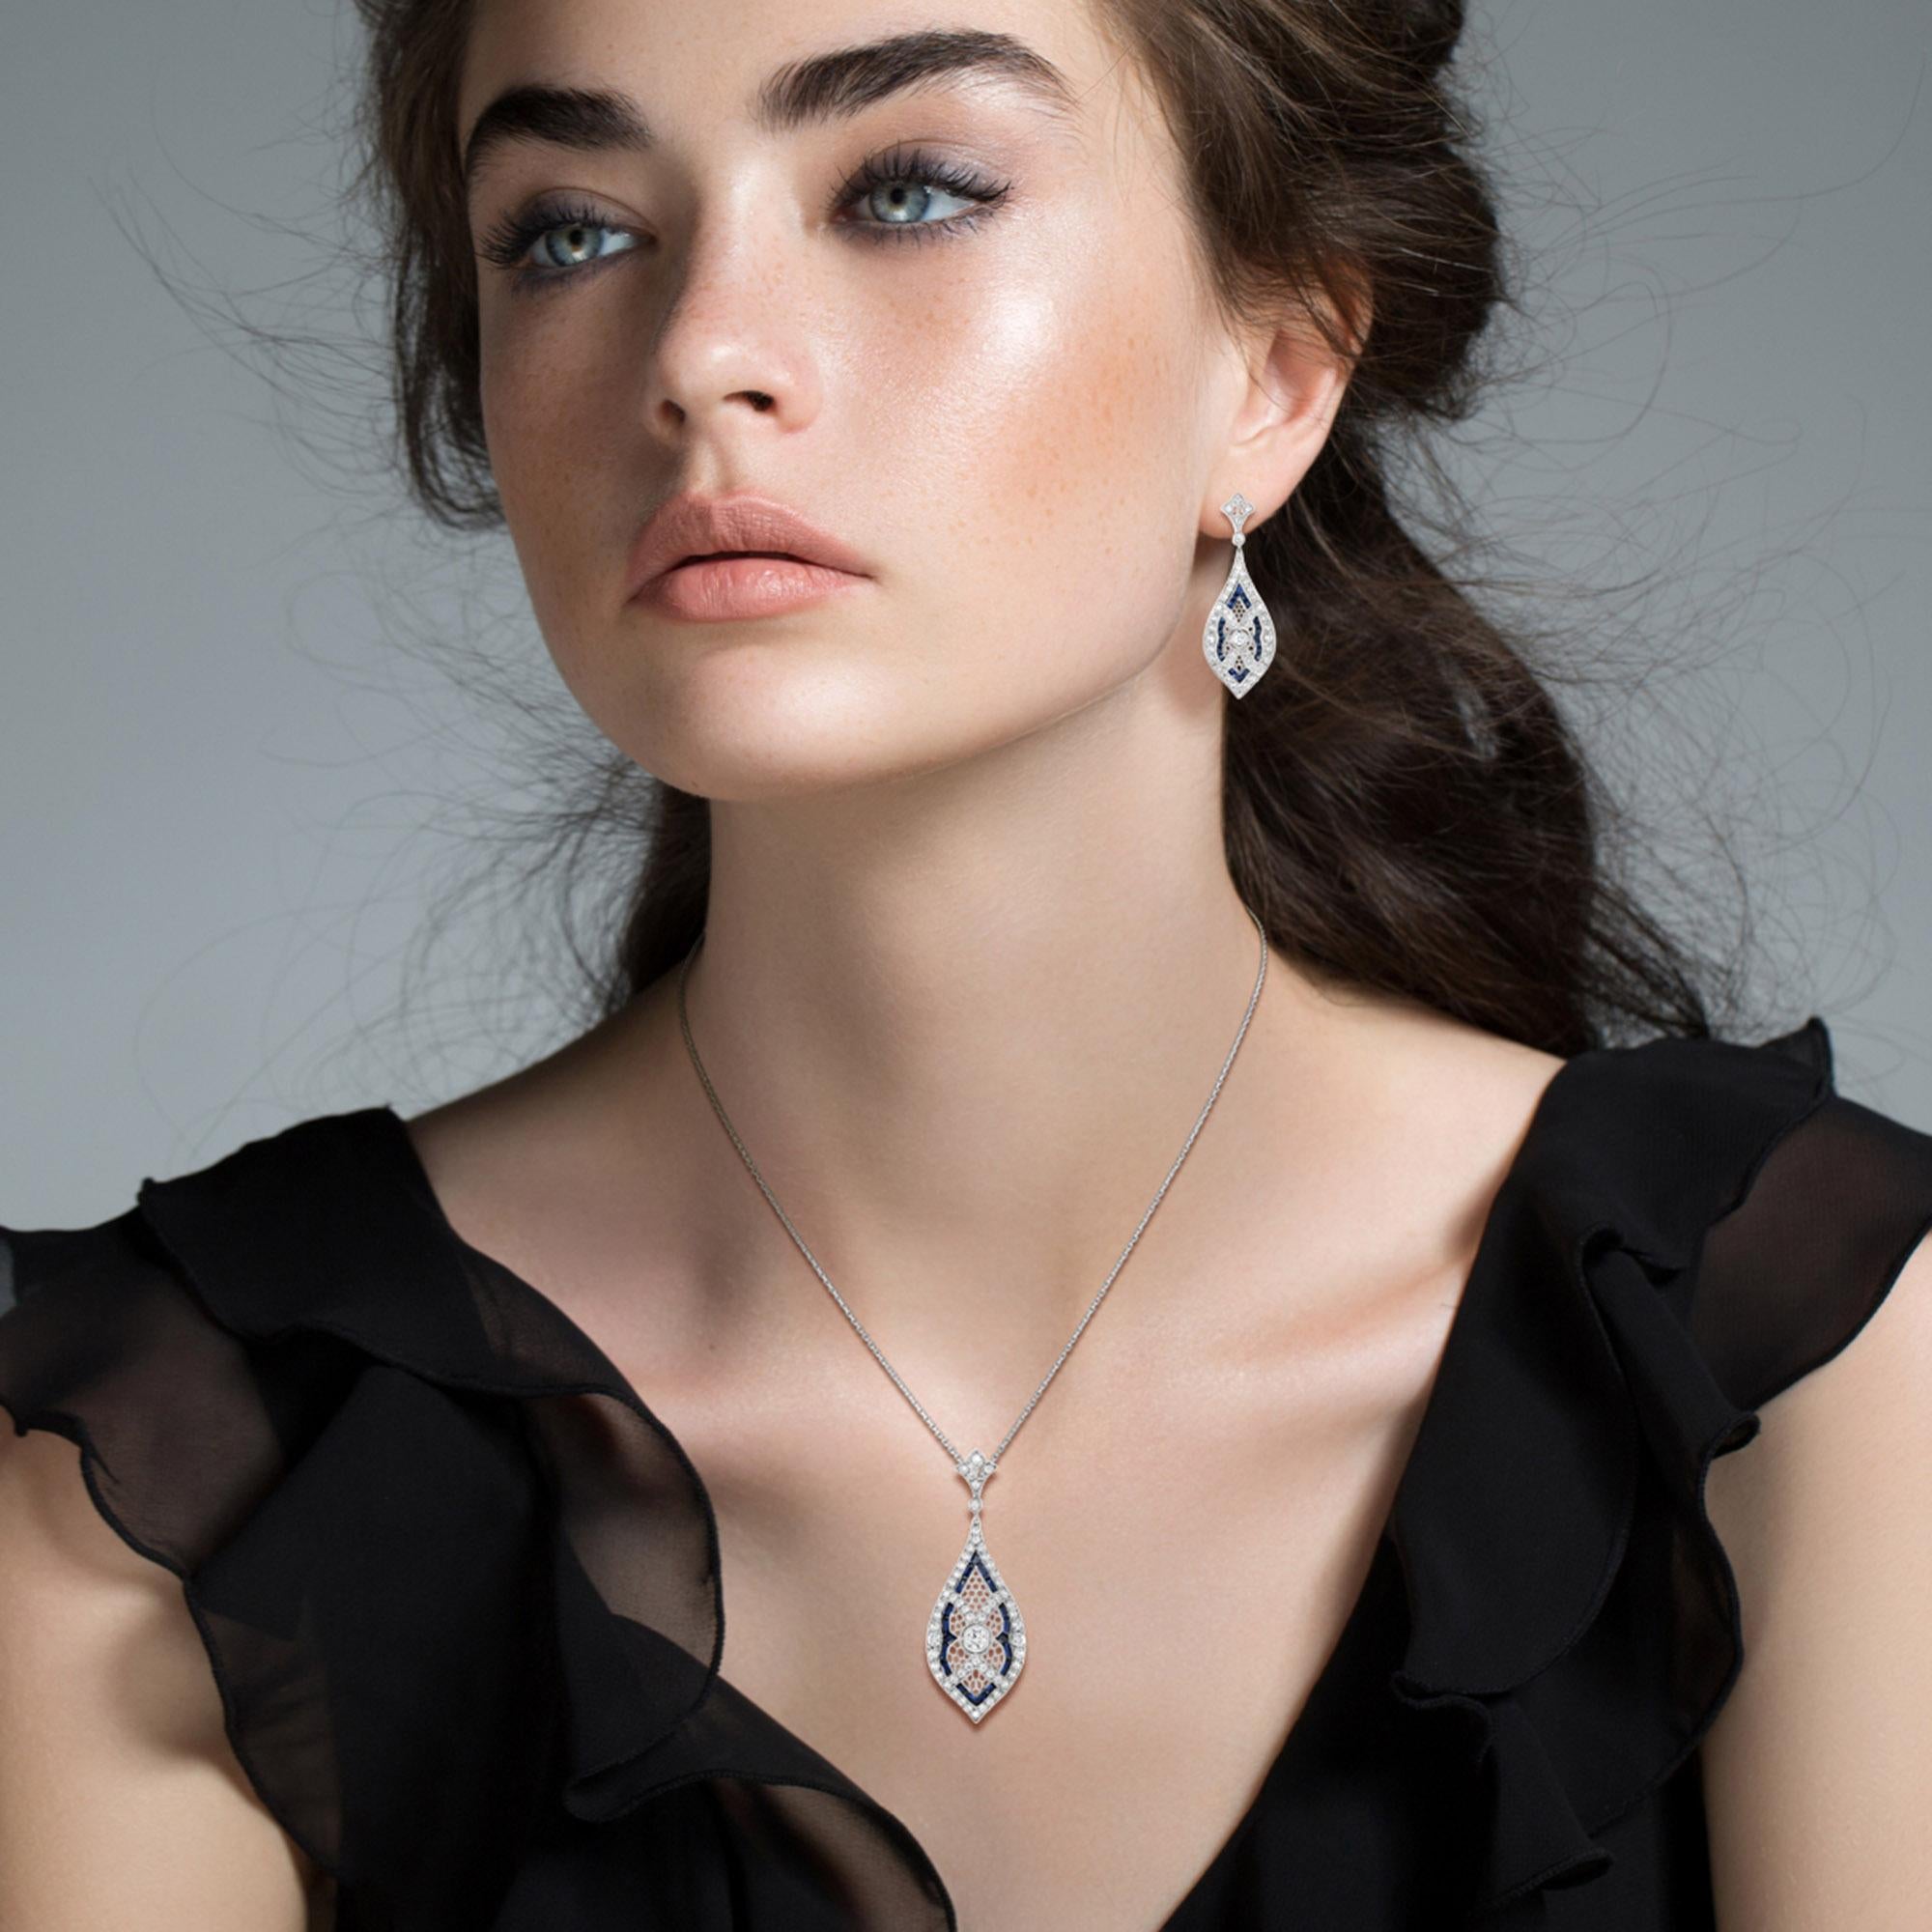 A pair of Art Deco style emerald and diamond pendant, set with French cut sapphires and round cut diamonds on open-work marquise shaped setting. Mounted in 14k white gold. A glamorous complement to an Art Deco female look. The pendant is perfectly